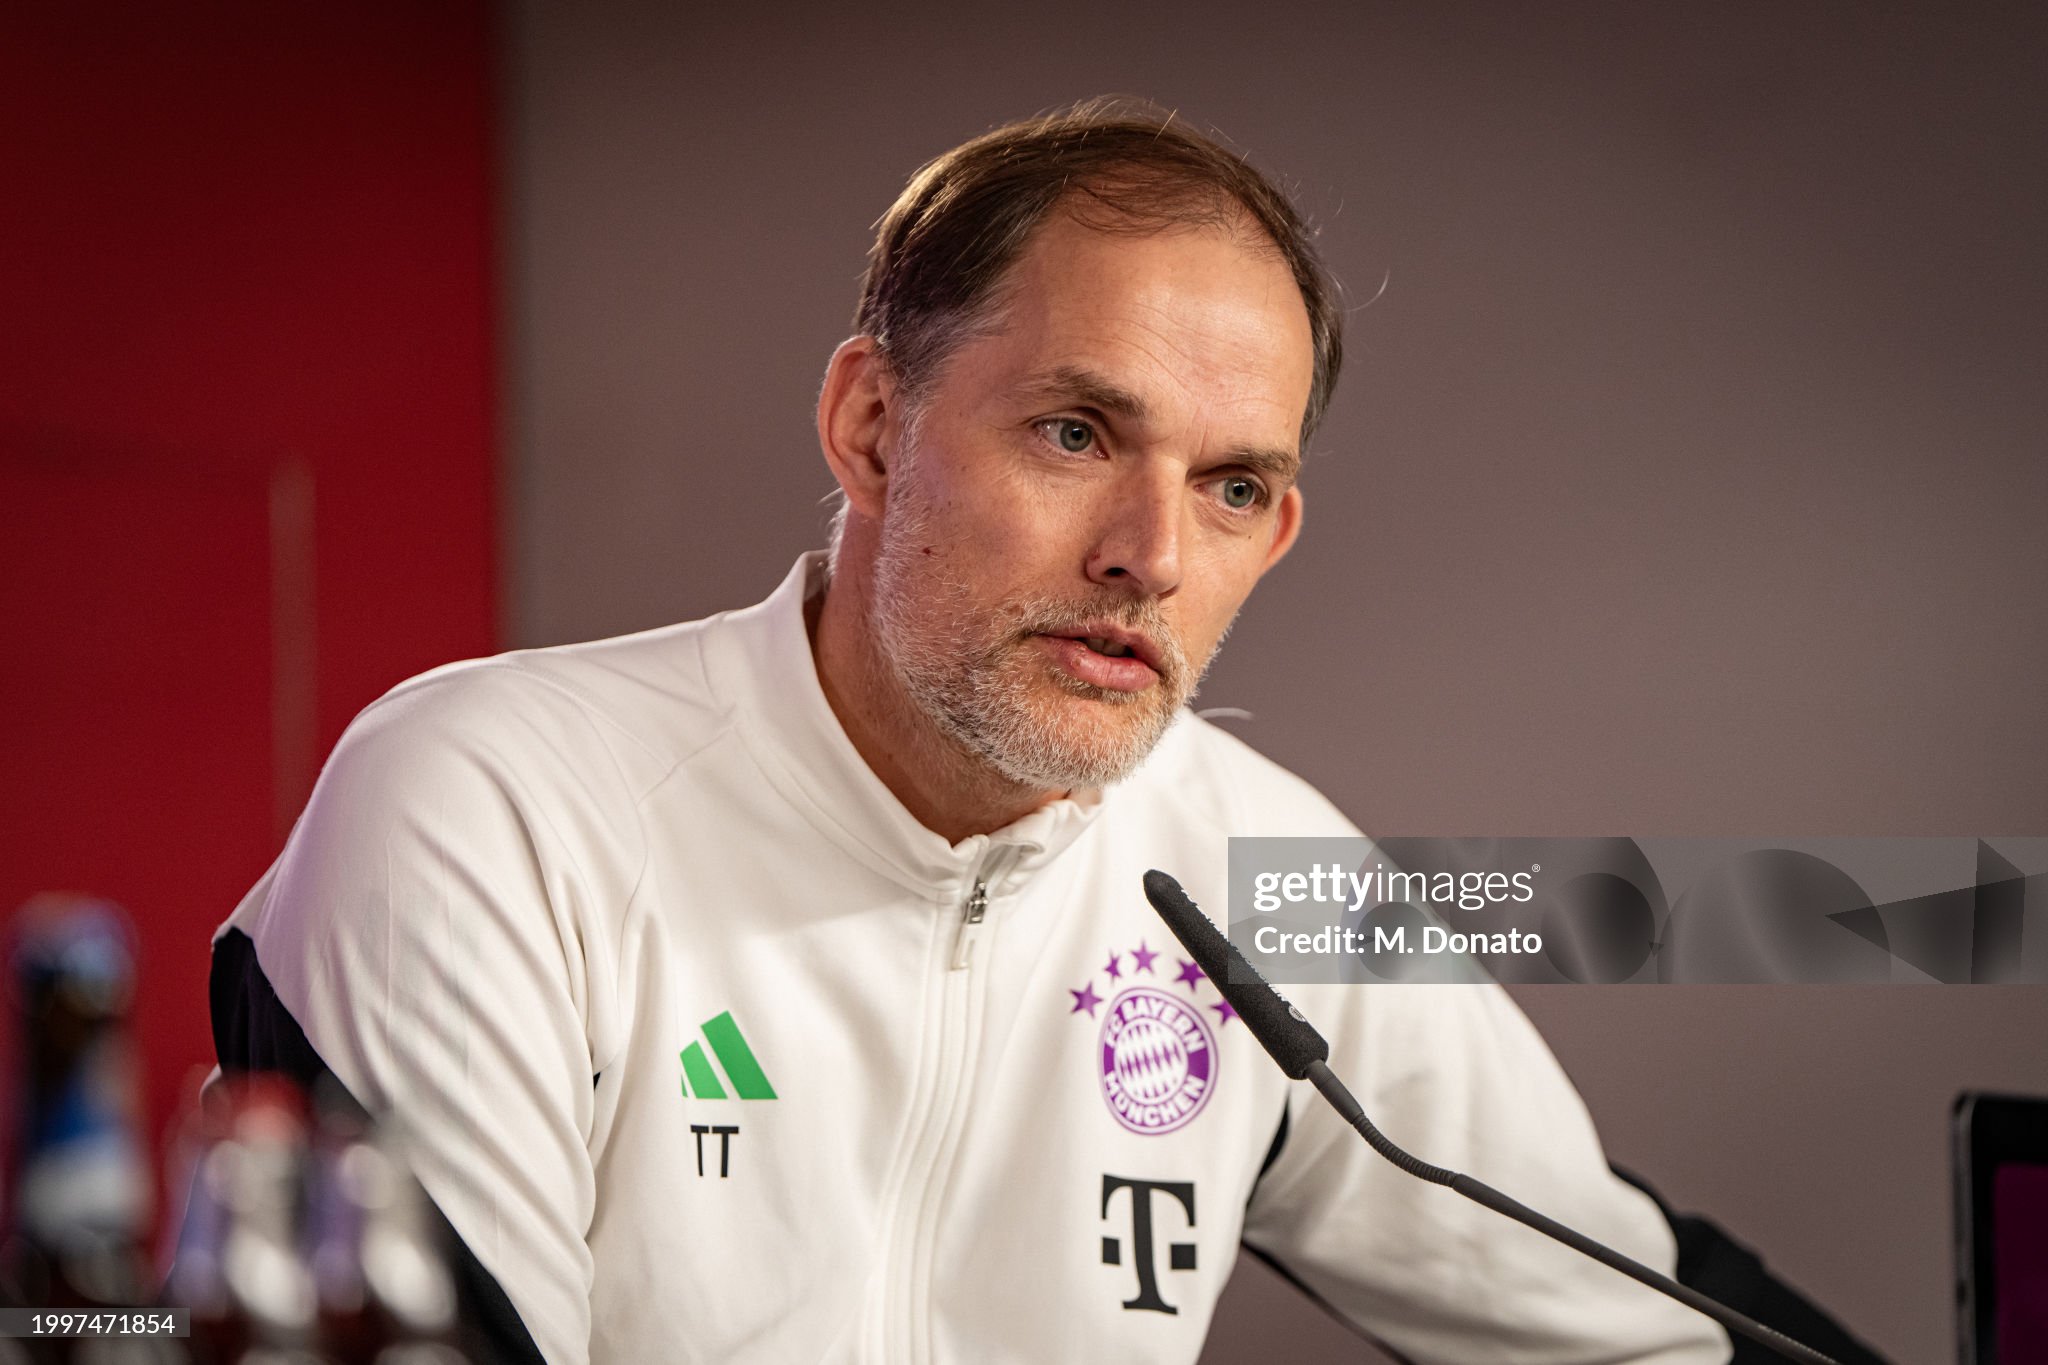 Tuchel compares Bayern Munich to the opponents of Roger Federer